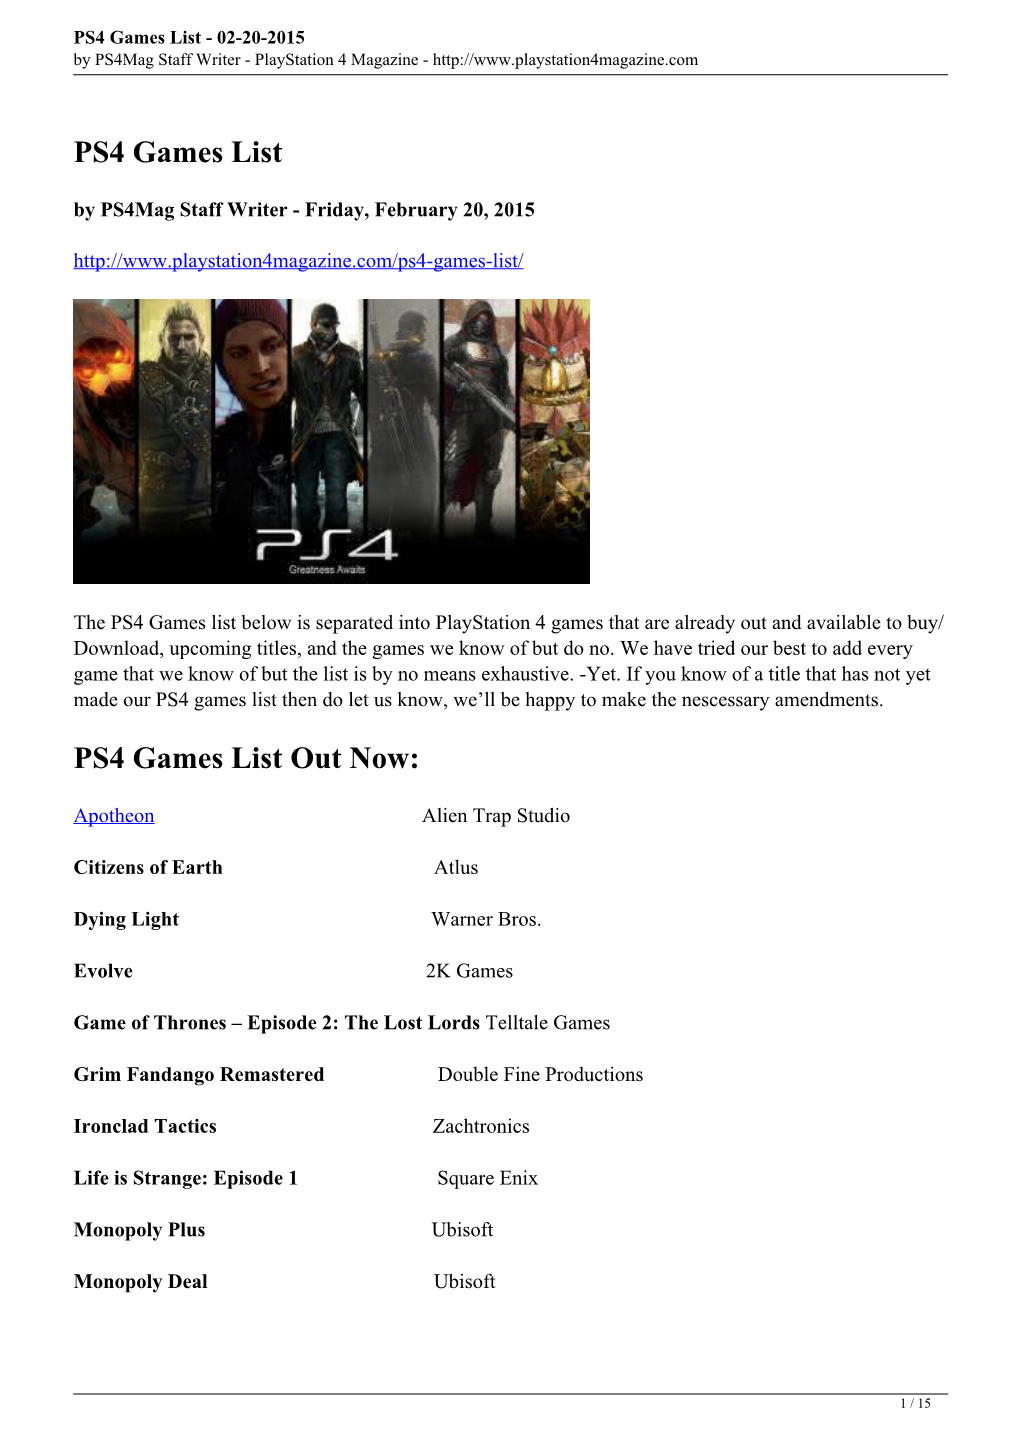 PS4 Games List - 02-20-2015 by Ps4mag Staff Writer - Playstation 4 Magazine